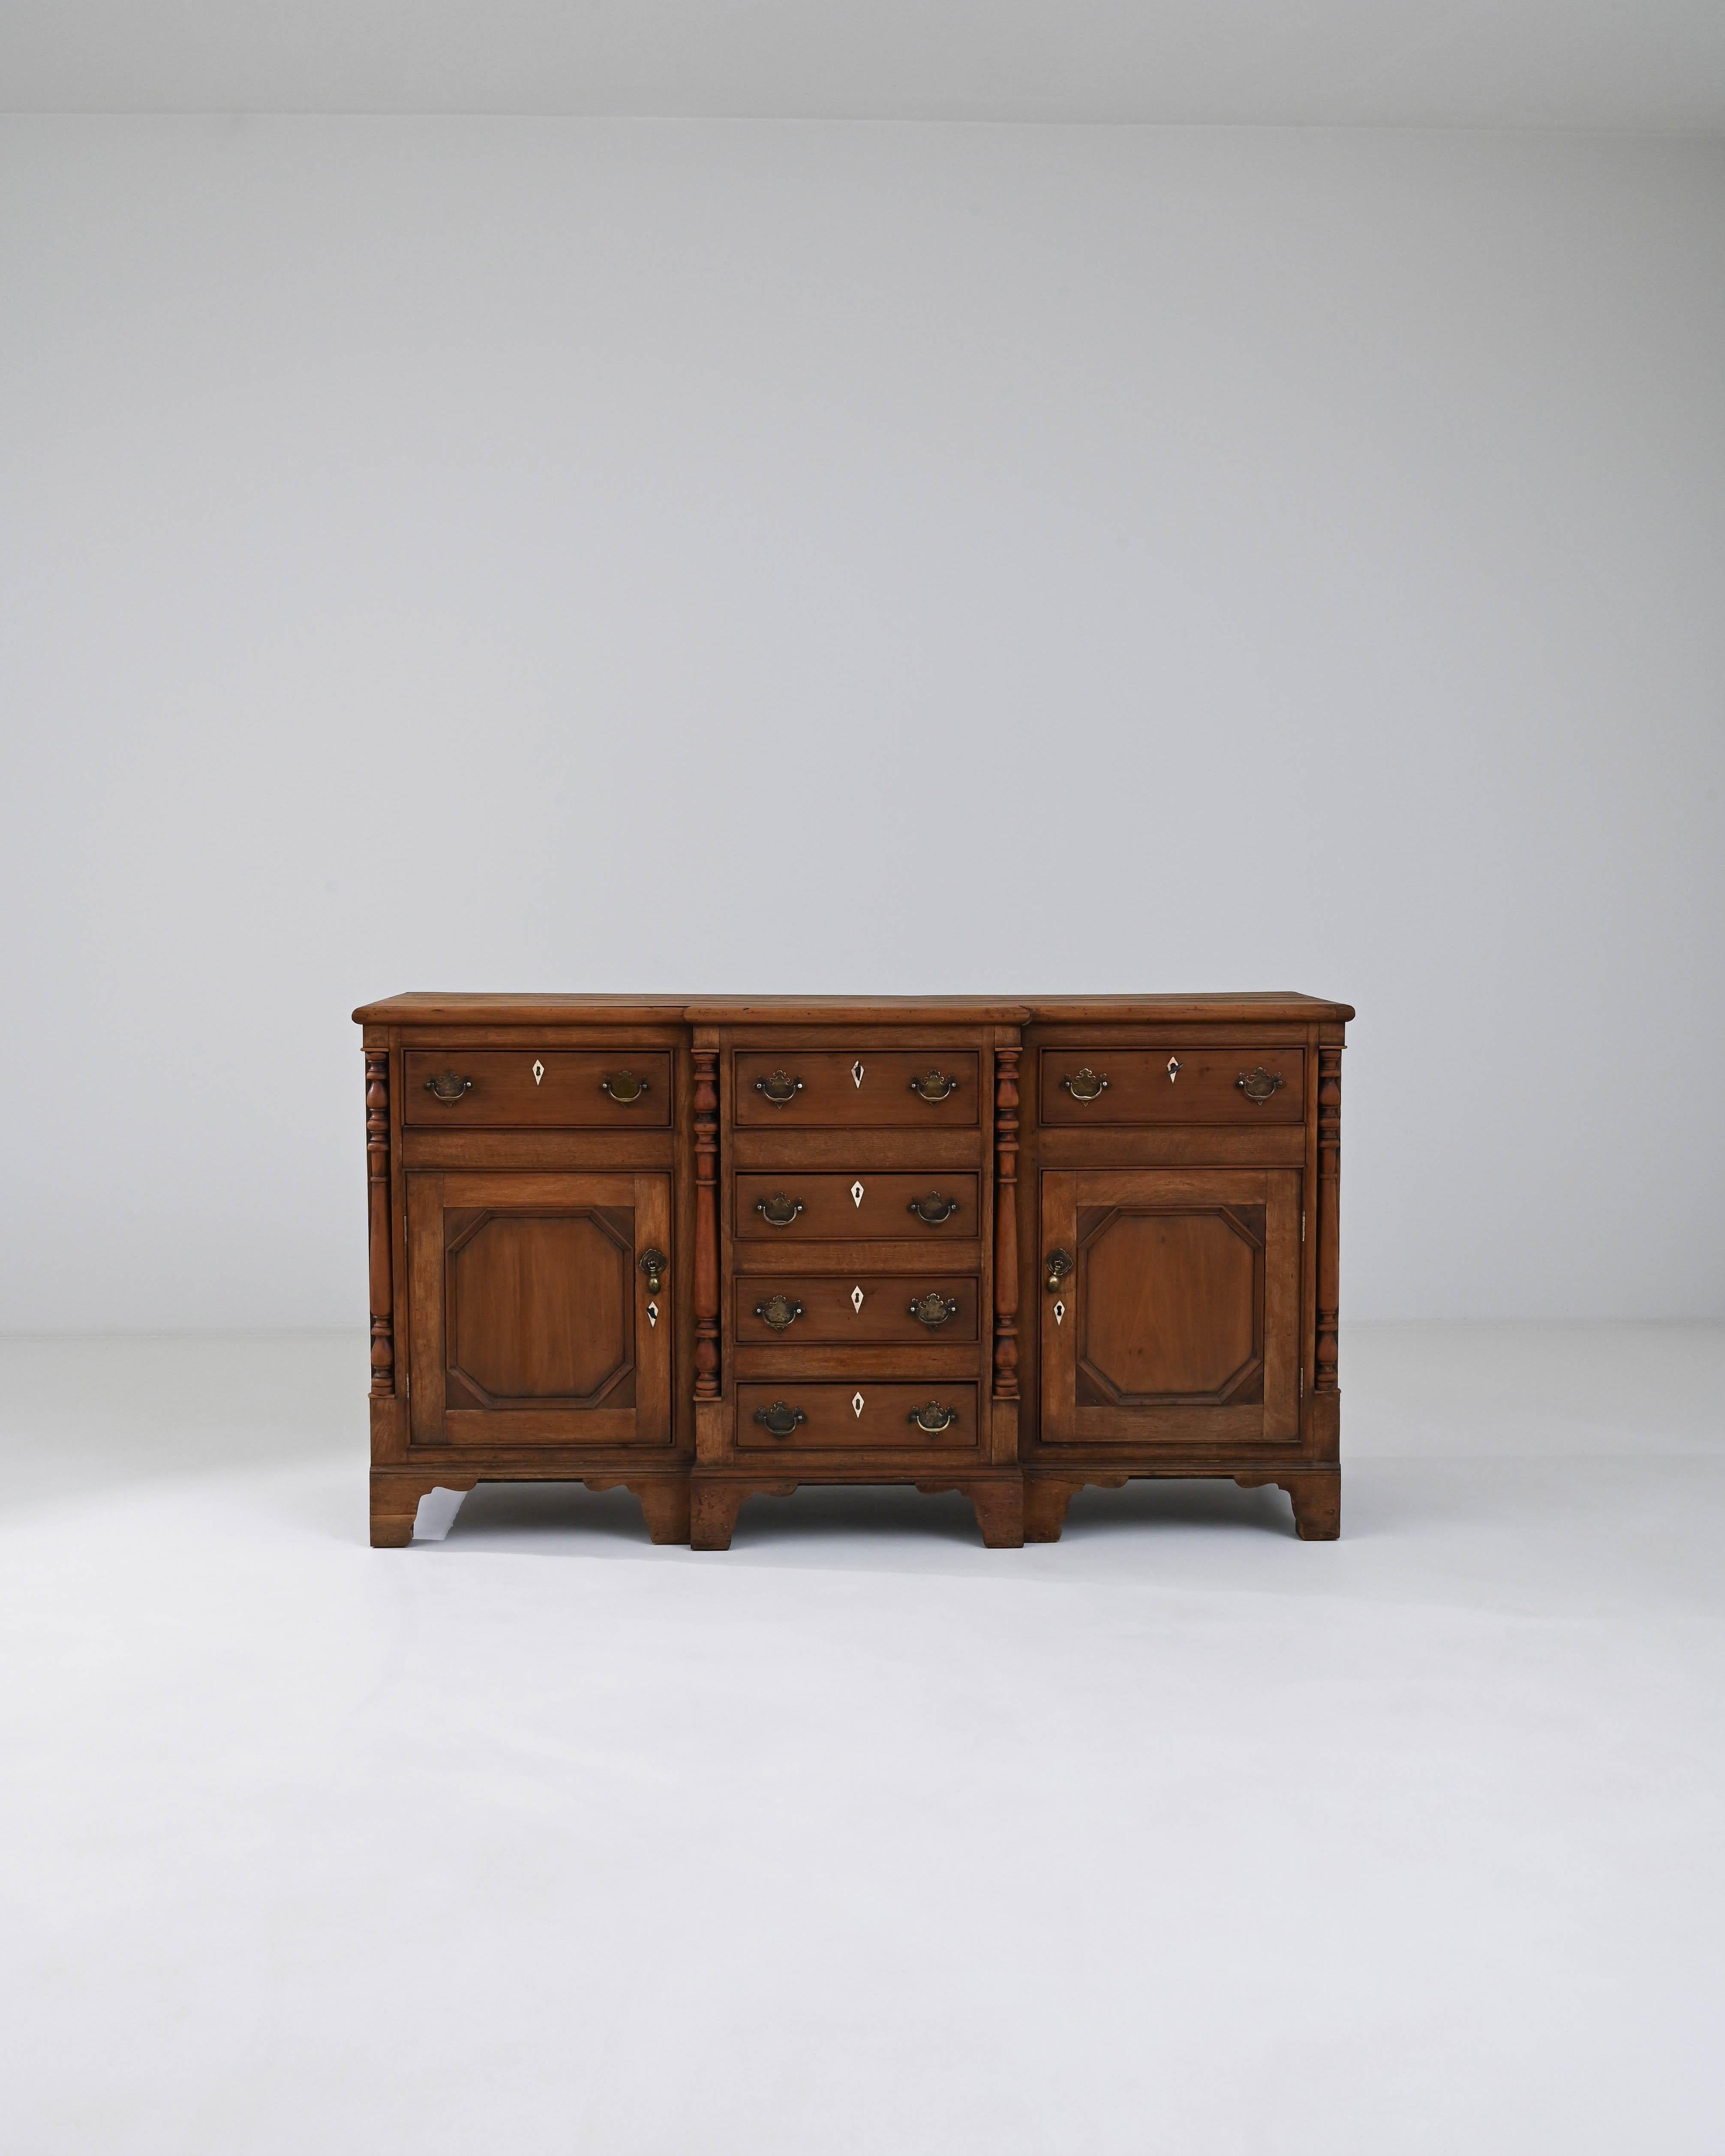 This 19th Century British Wooden Buffet exudes the charm and robust grace of the period. A harmonious blend of utility and style, it features a solid wooden structure that tells the story of its age with a warm patina that only time can bestow. The